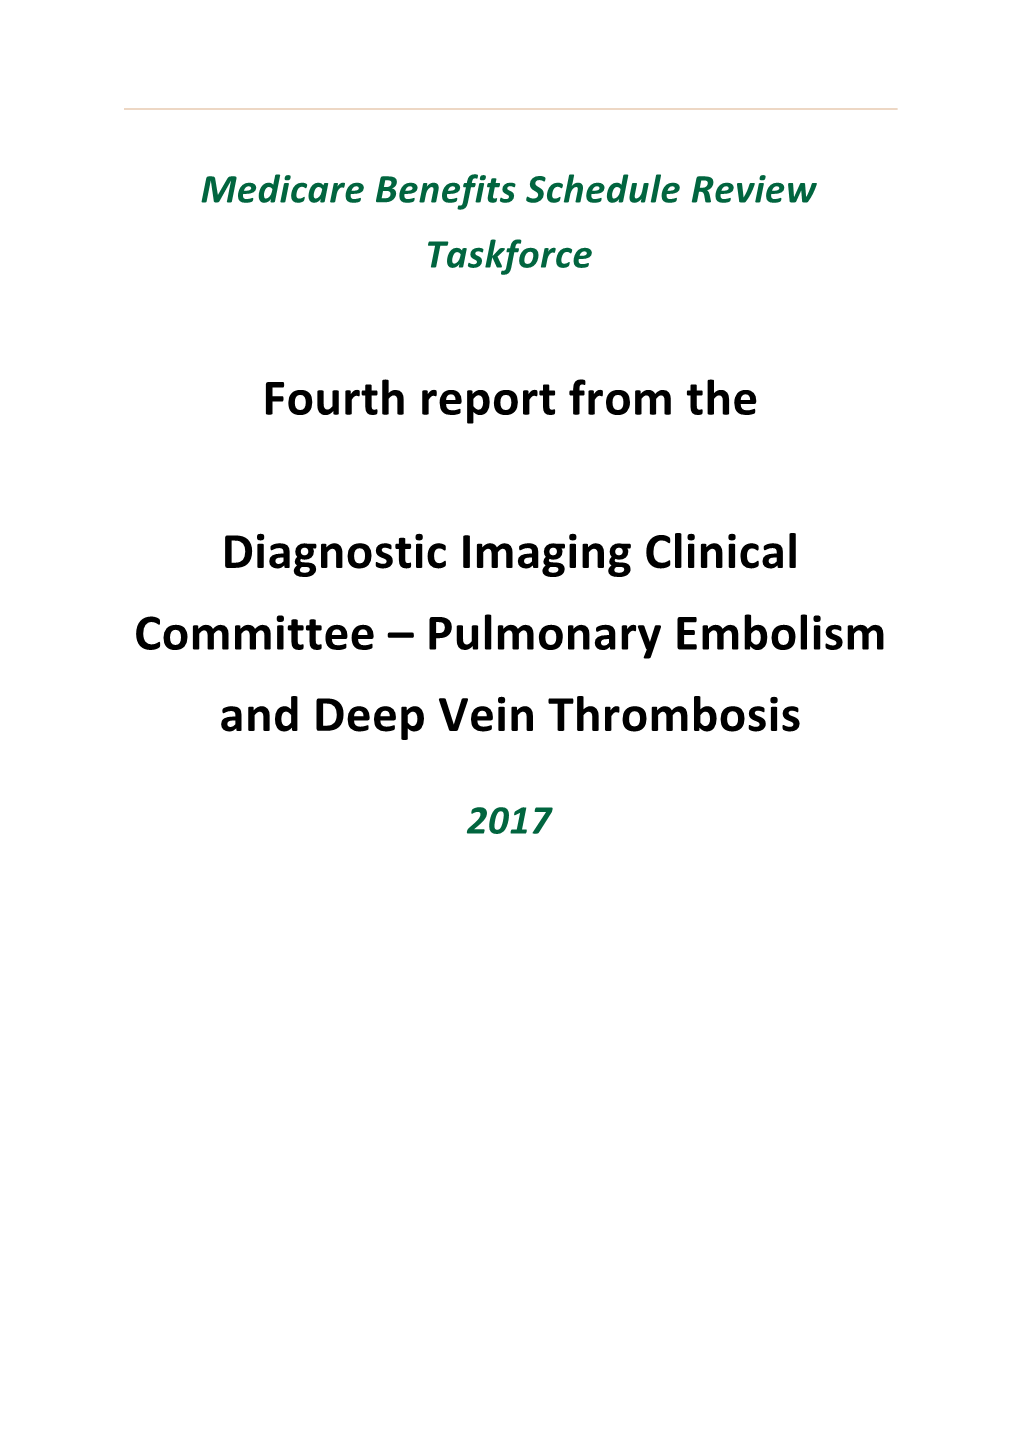 Medicare Benefits Schedule Review Taskforce - Fourth Report from the Diagnostic Imaging